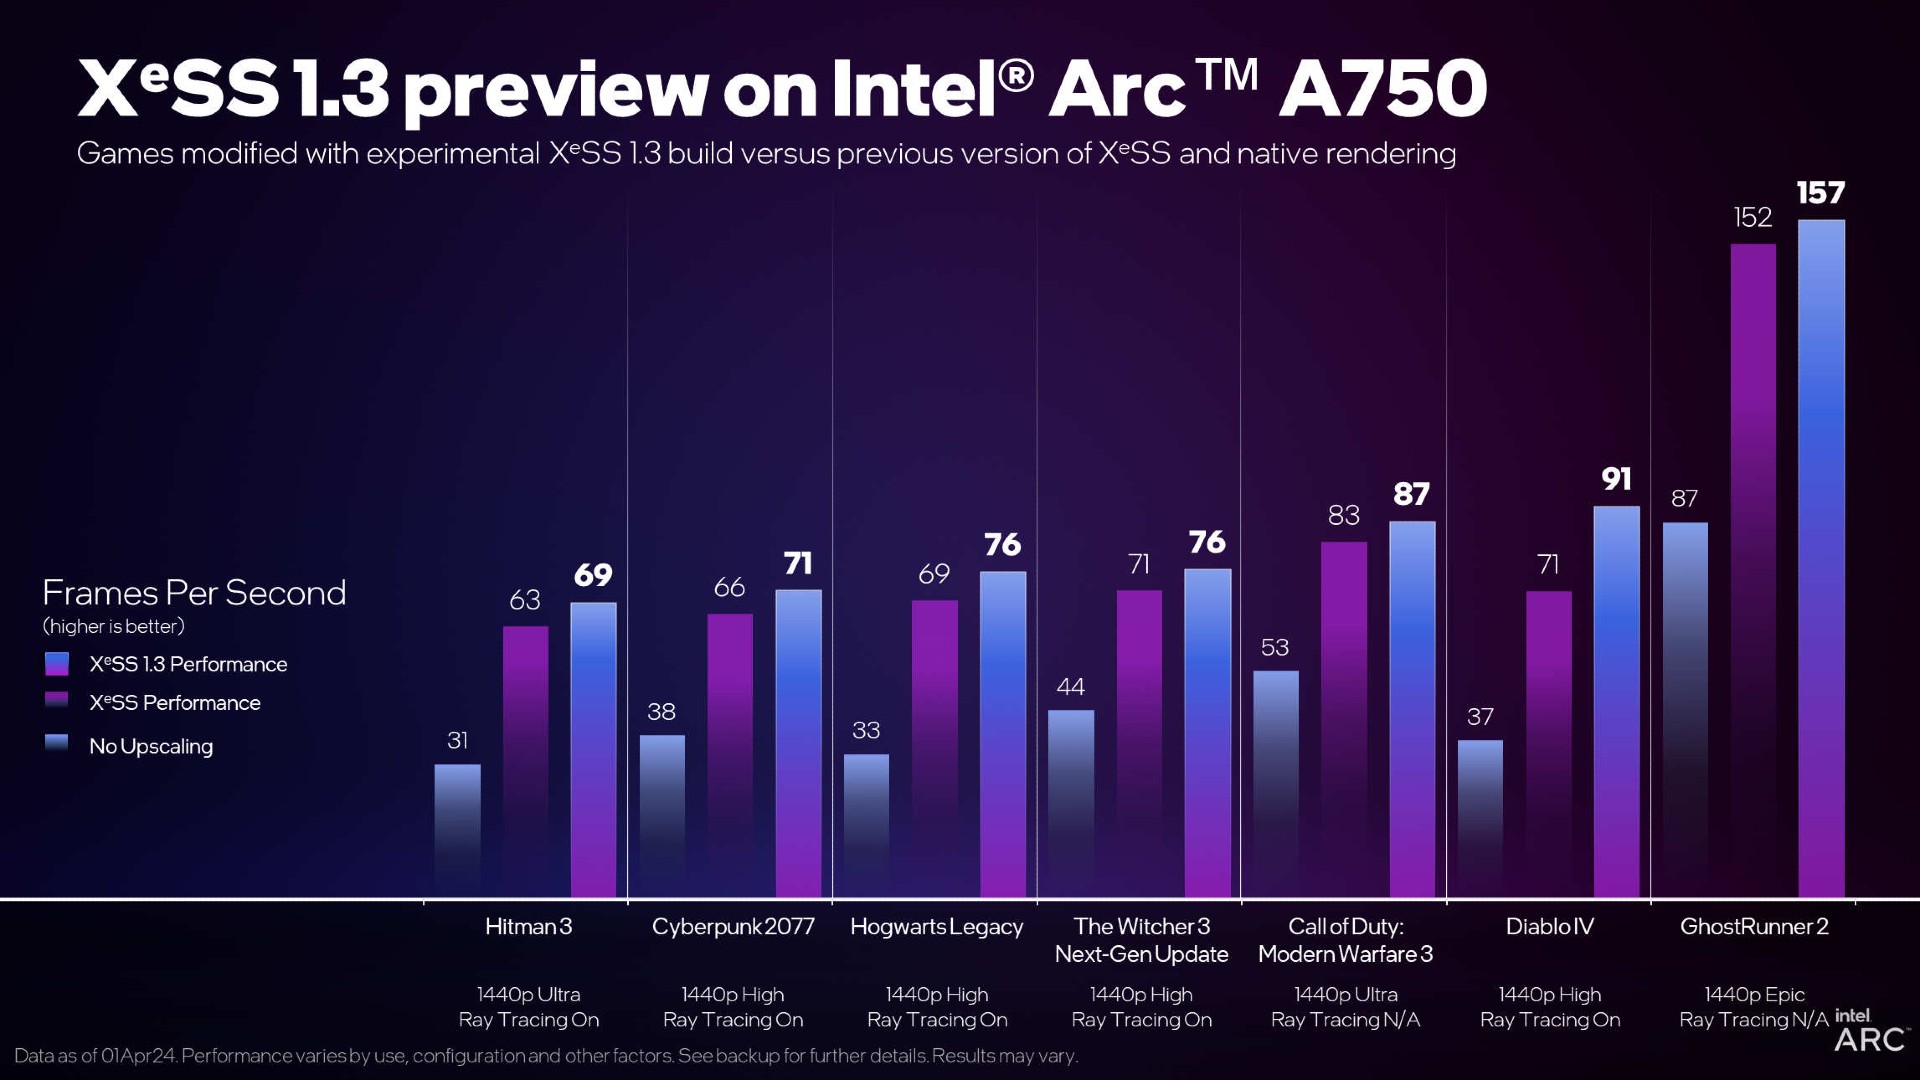 a preview chart for Intel XeSS 1.3 showing multiple games performance with the new tech